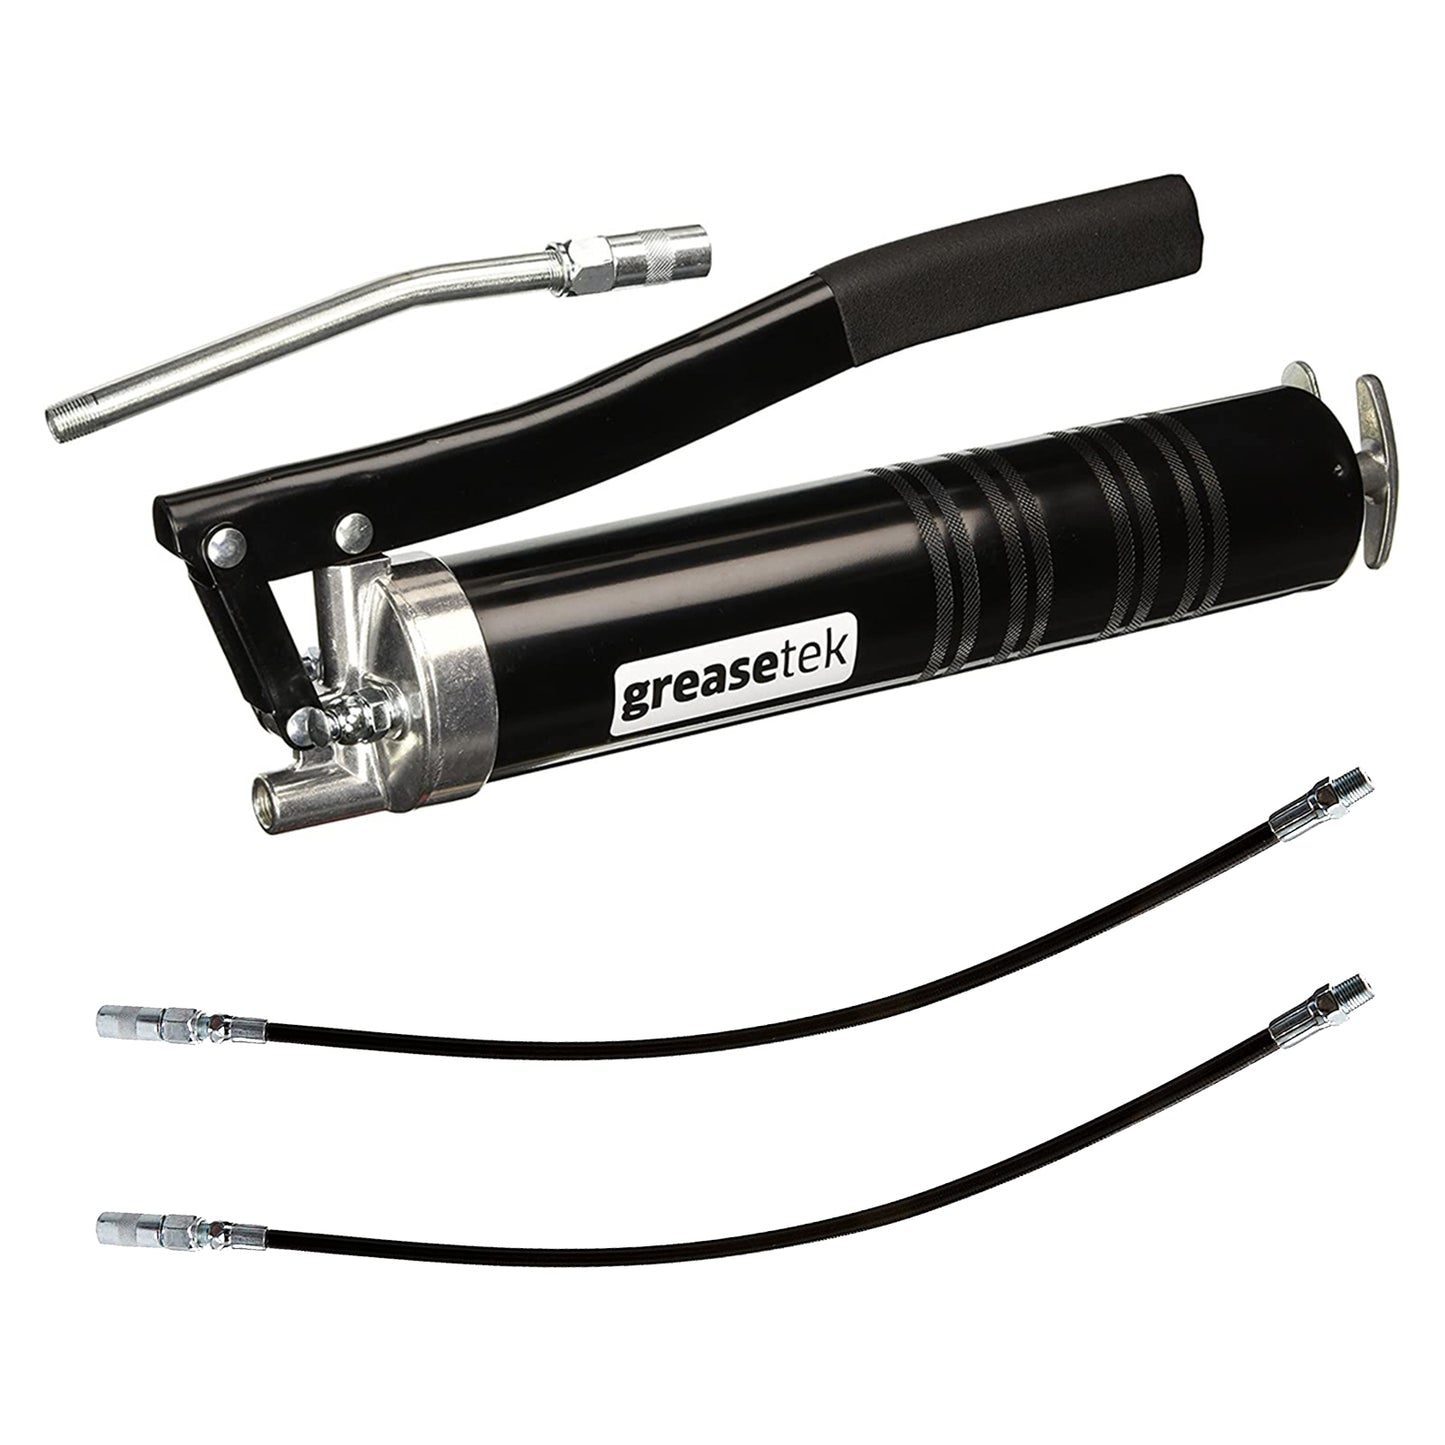 GreaseTek Standard Lever Grease Gun with Extension Pipe + 2 Flex Hoses